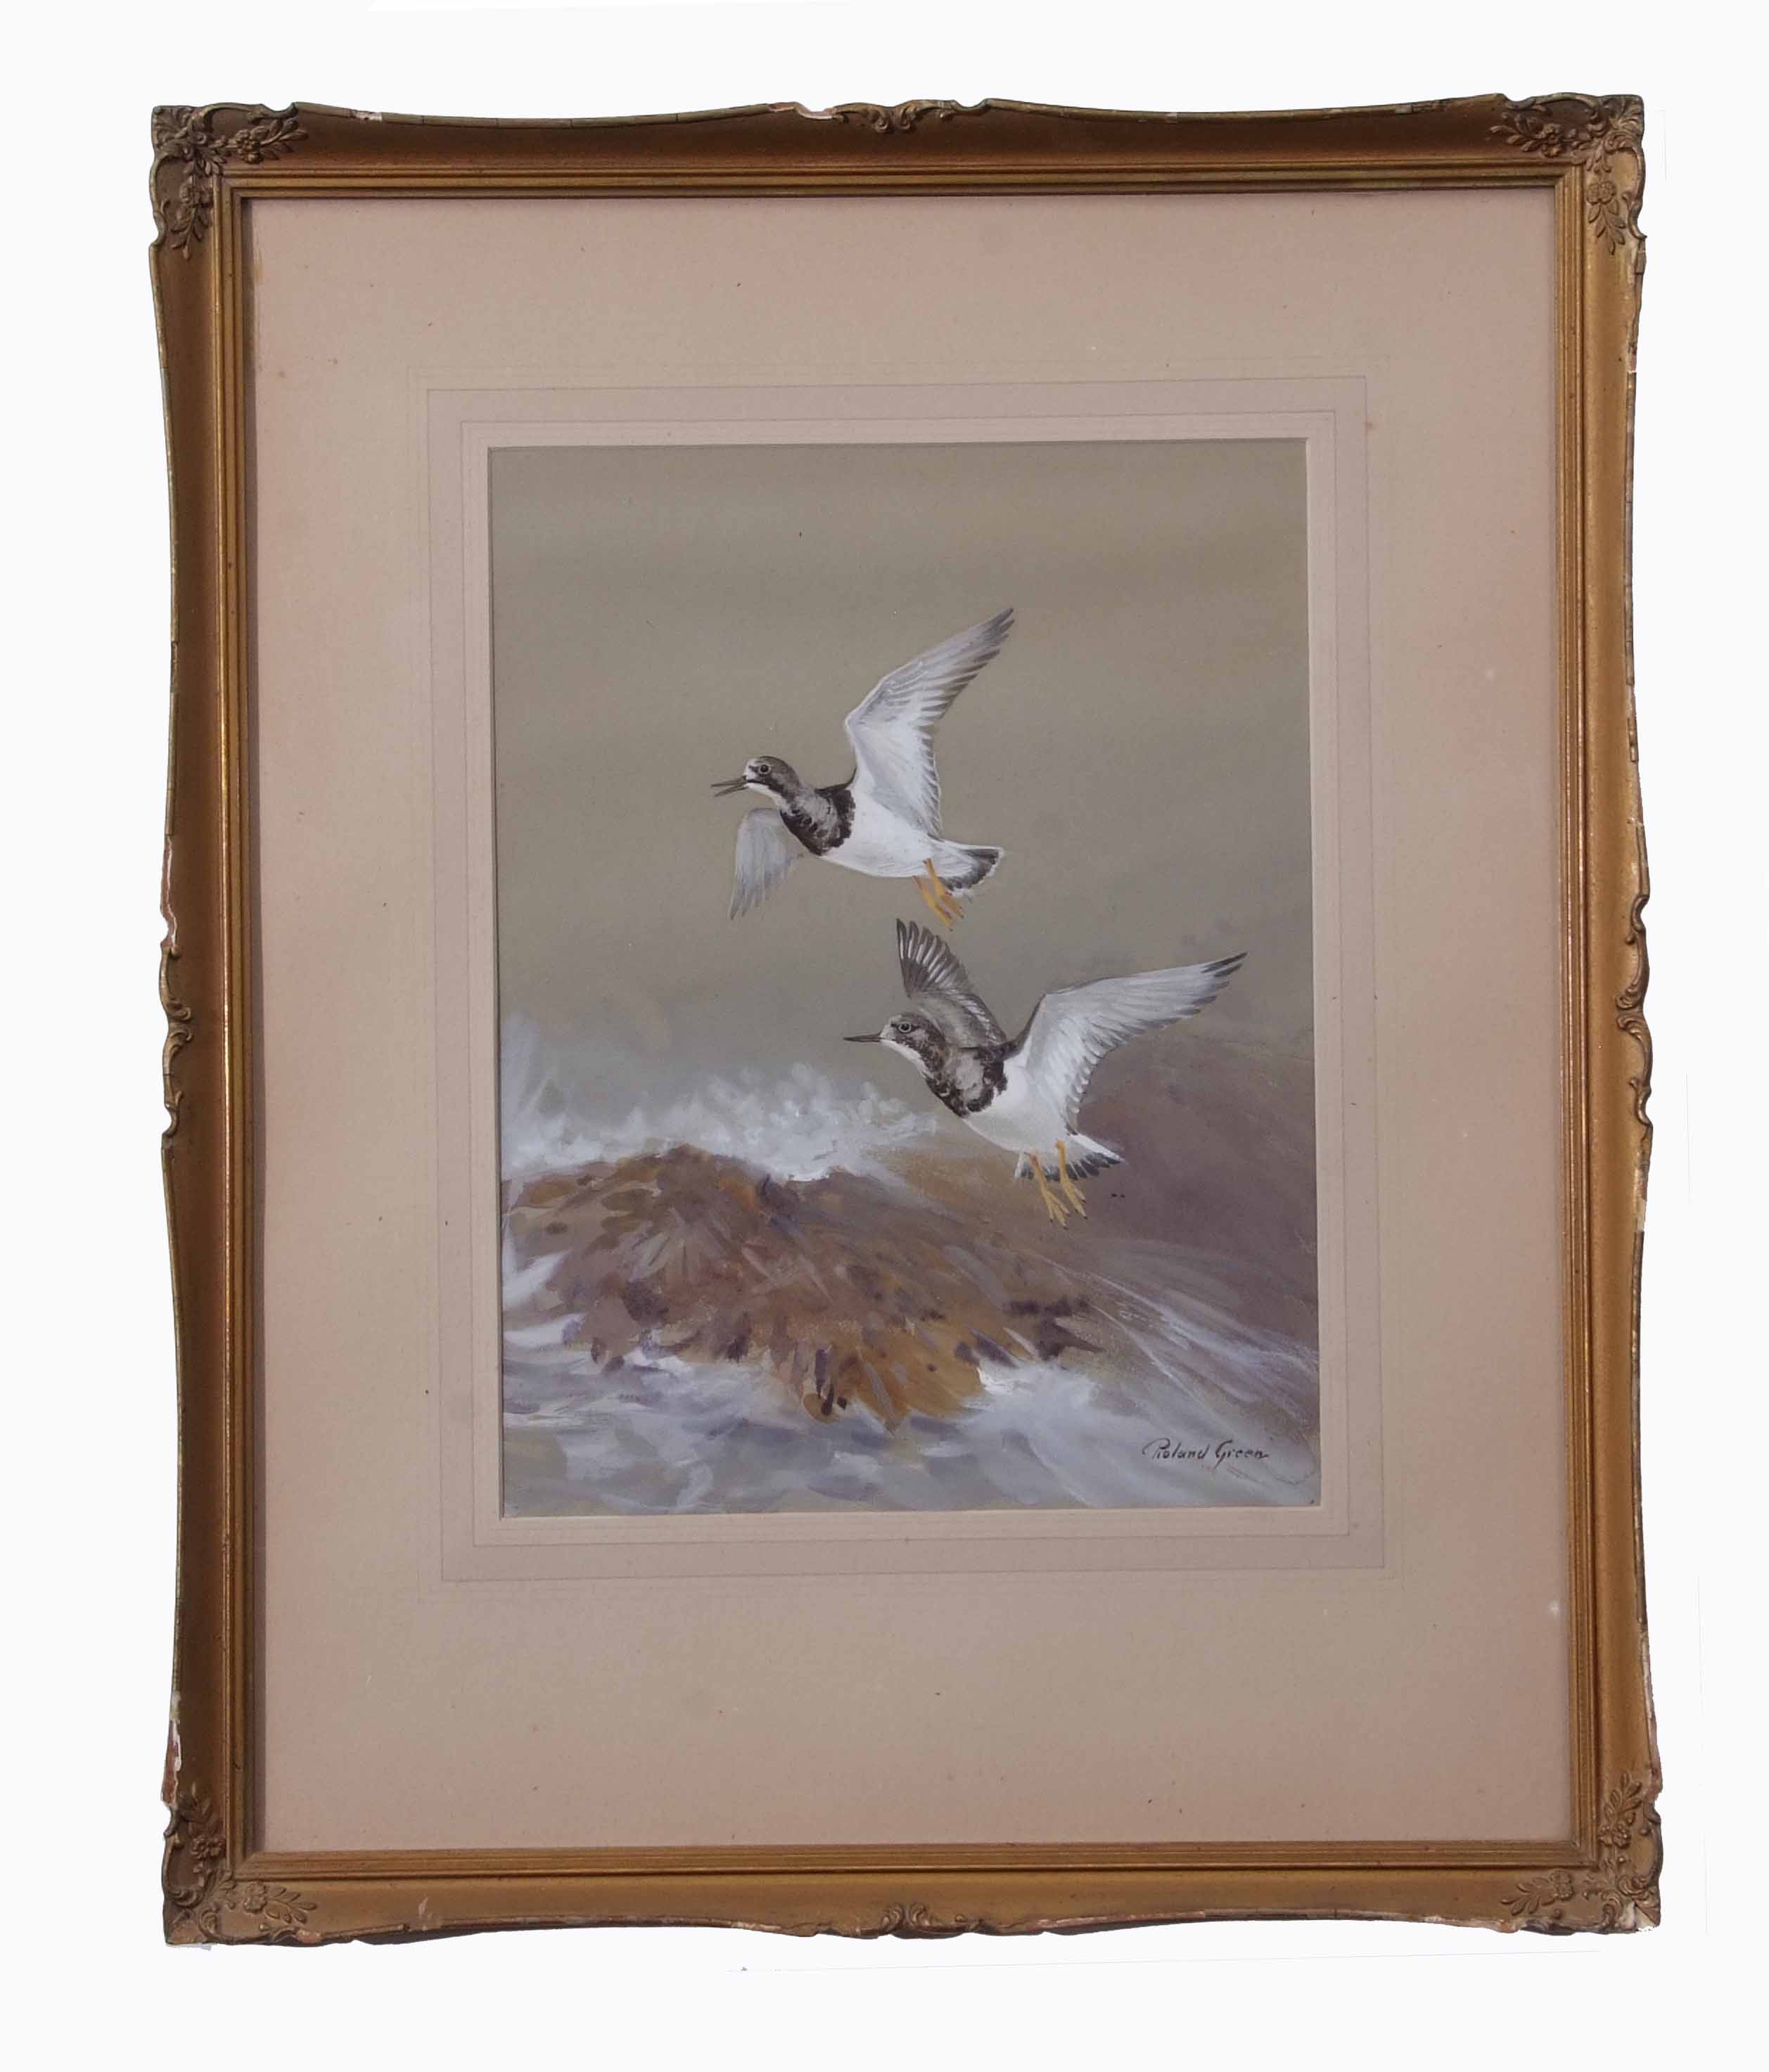 AR Roland Green (1896-1972), Plover in flight over a coast, watercolour and gouache, signed lower - Image 2 of 2